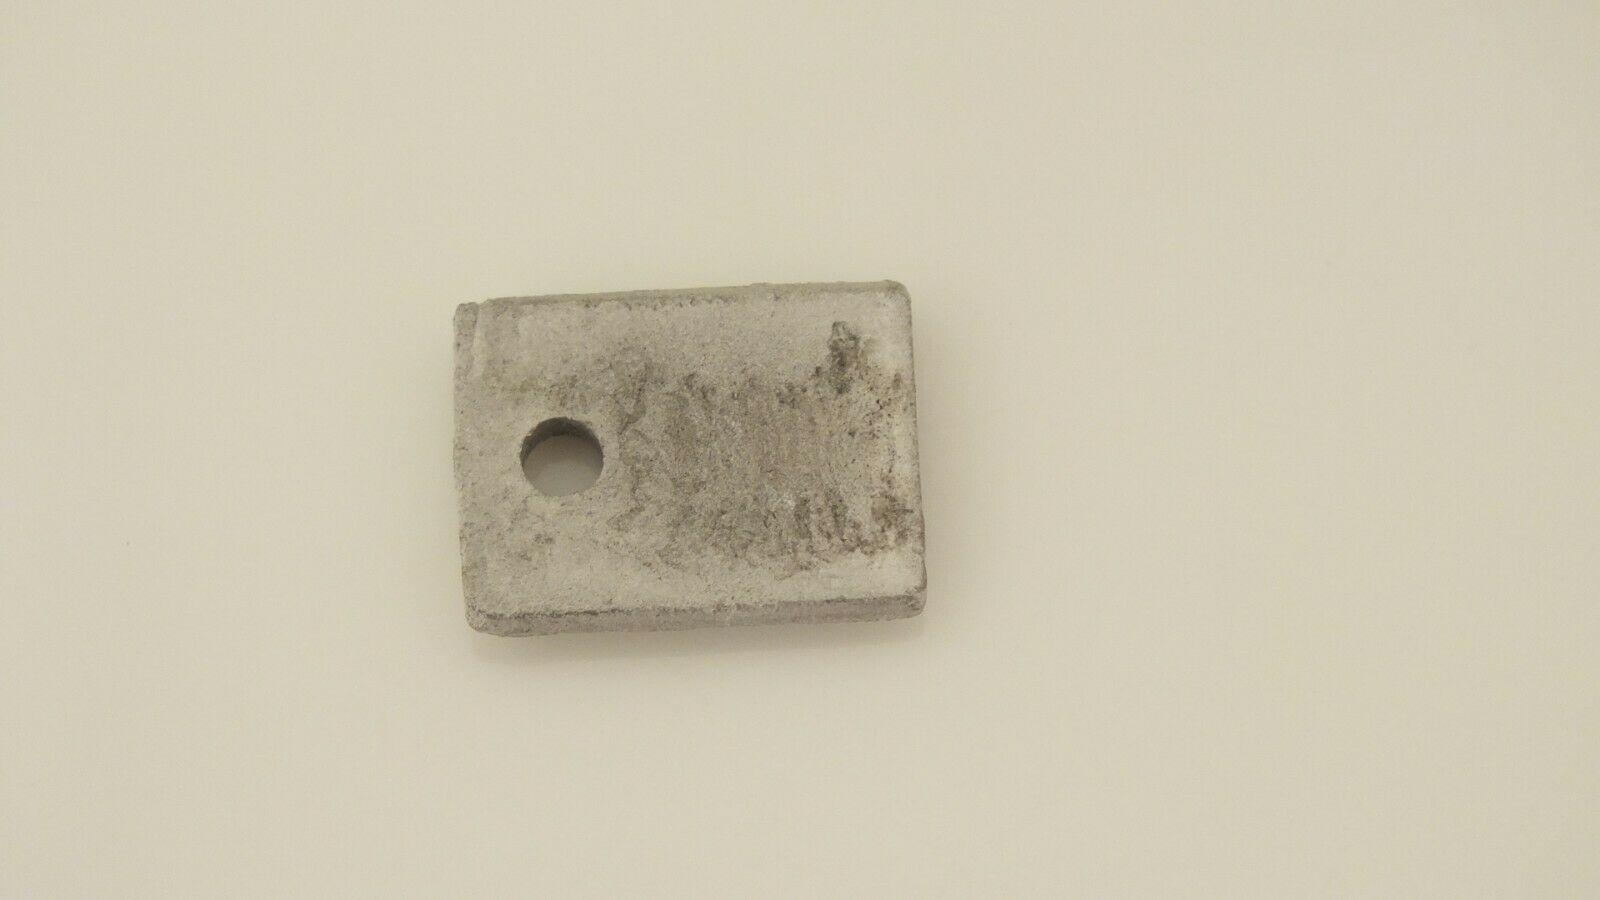 S4210R #   HORNBY TRIANG SYNCRO SMOKE UNIT COVER PLATE   0-6-0 JINTY      U2B